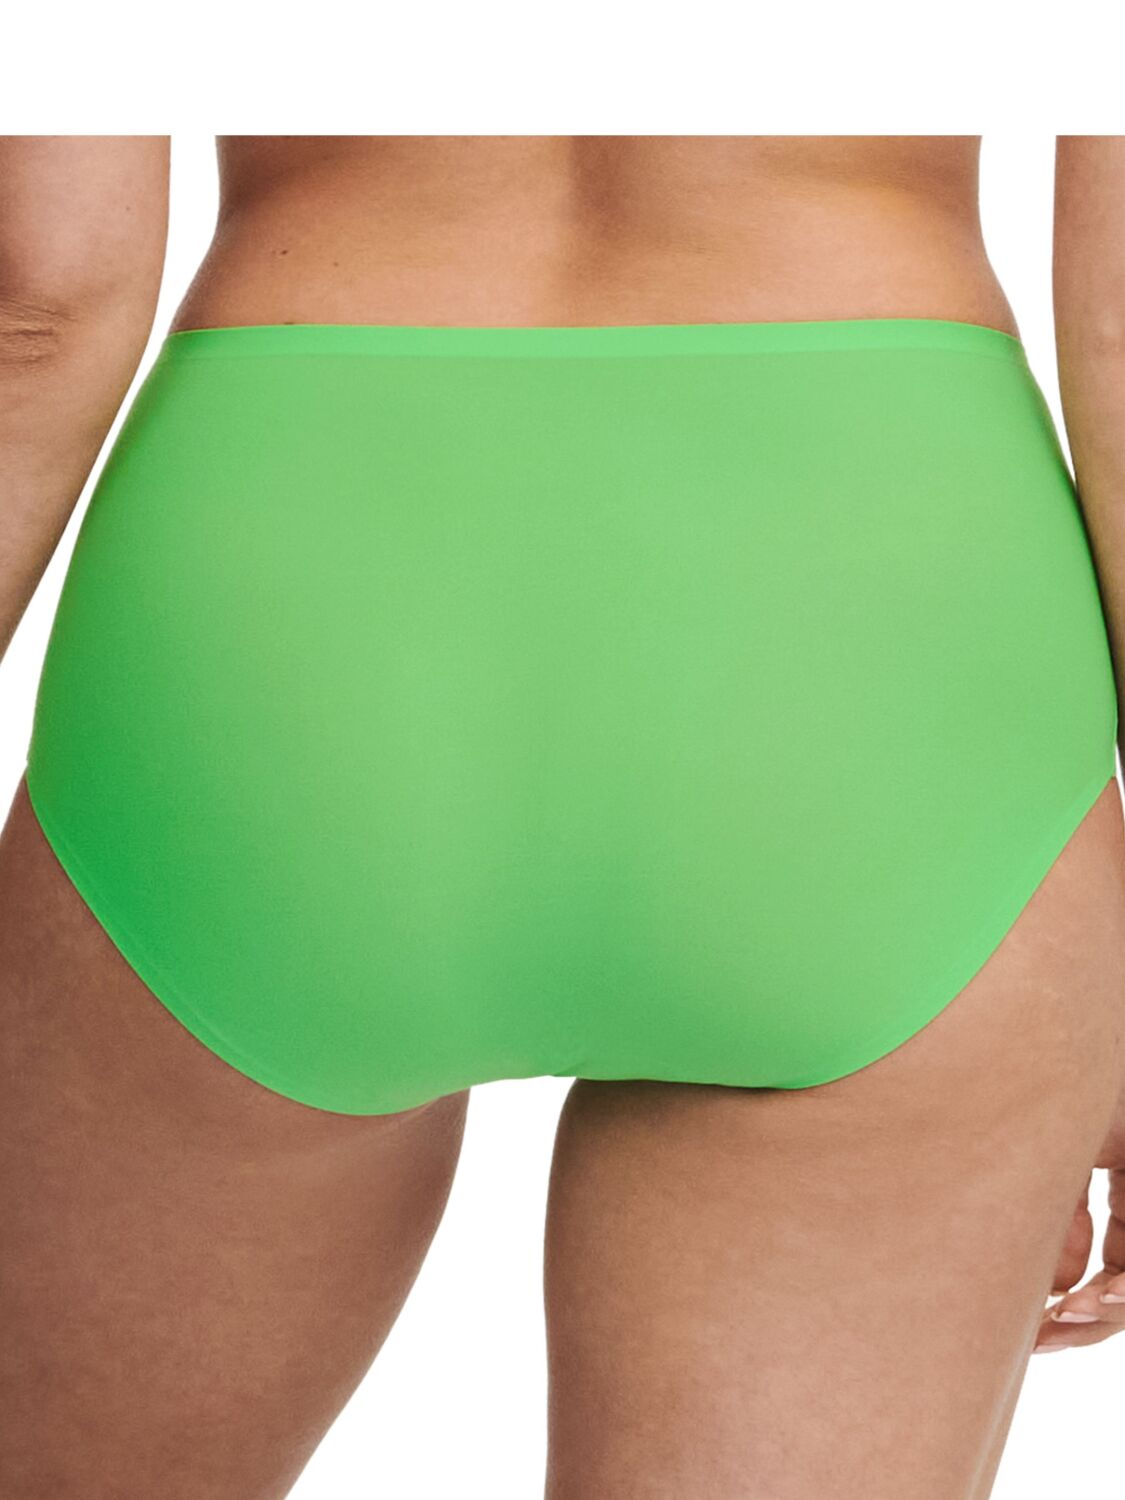 Chantelle Taillenslip ONE SIZE SoftStretch Farbe Poison Green